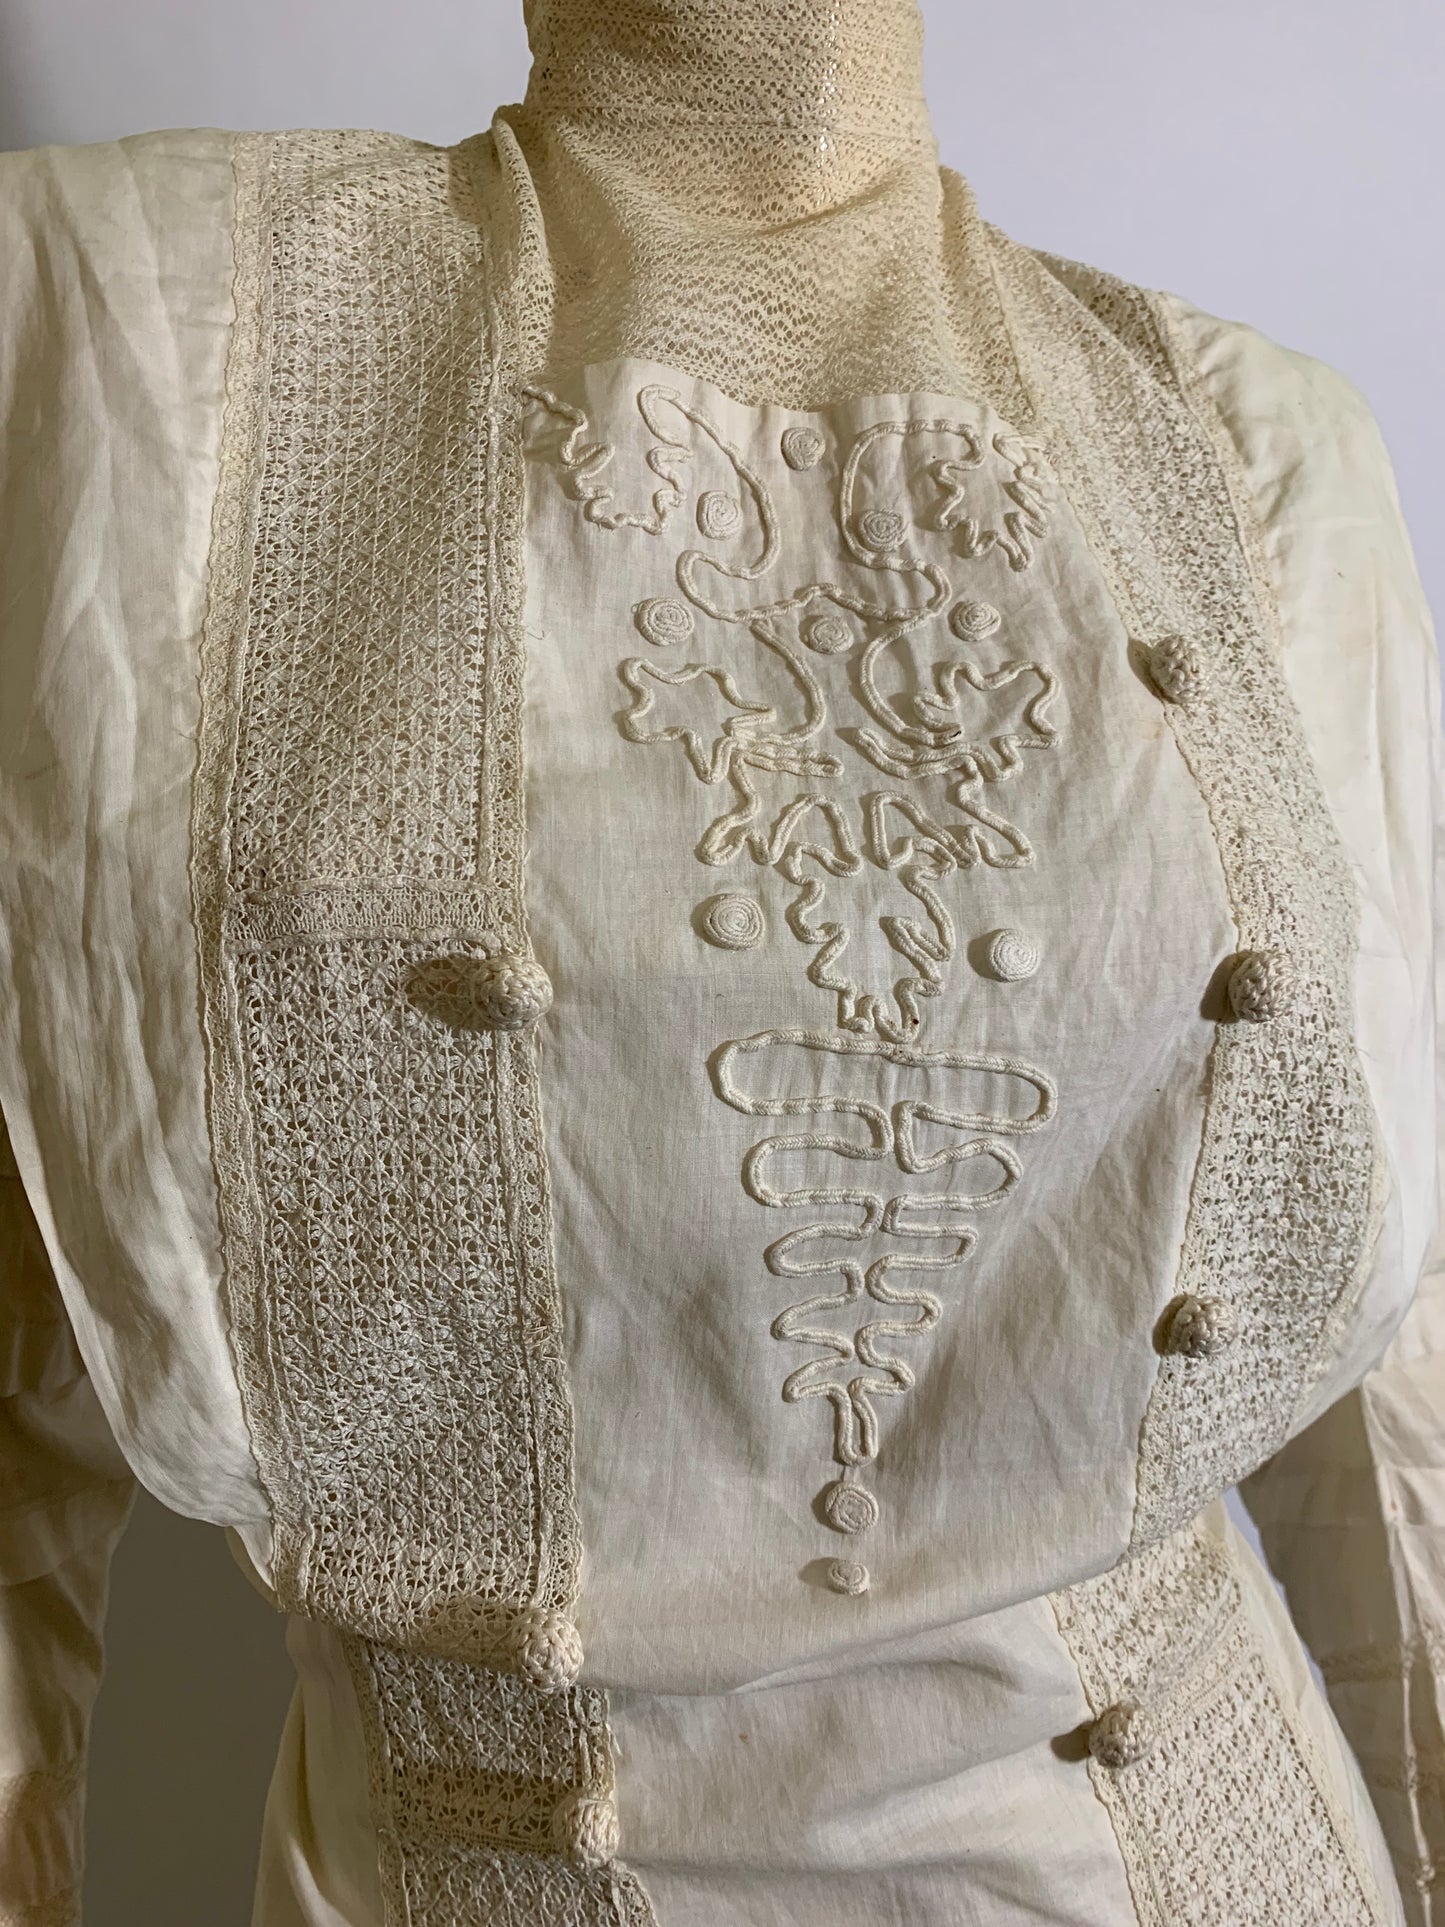 Summer Party Dress in White Lawn Cotton with Embroidery and Lace circa 1910s